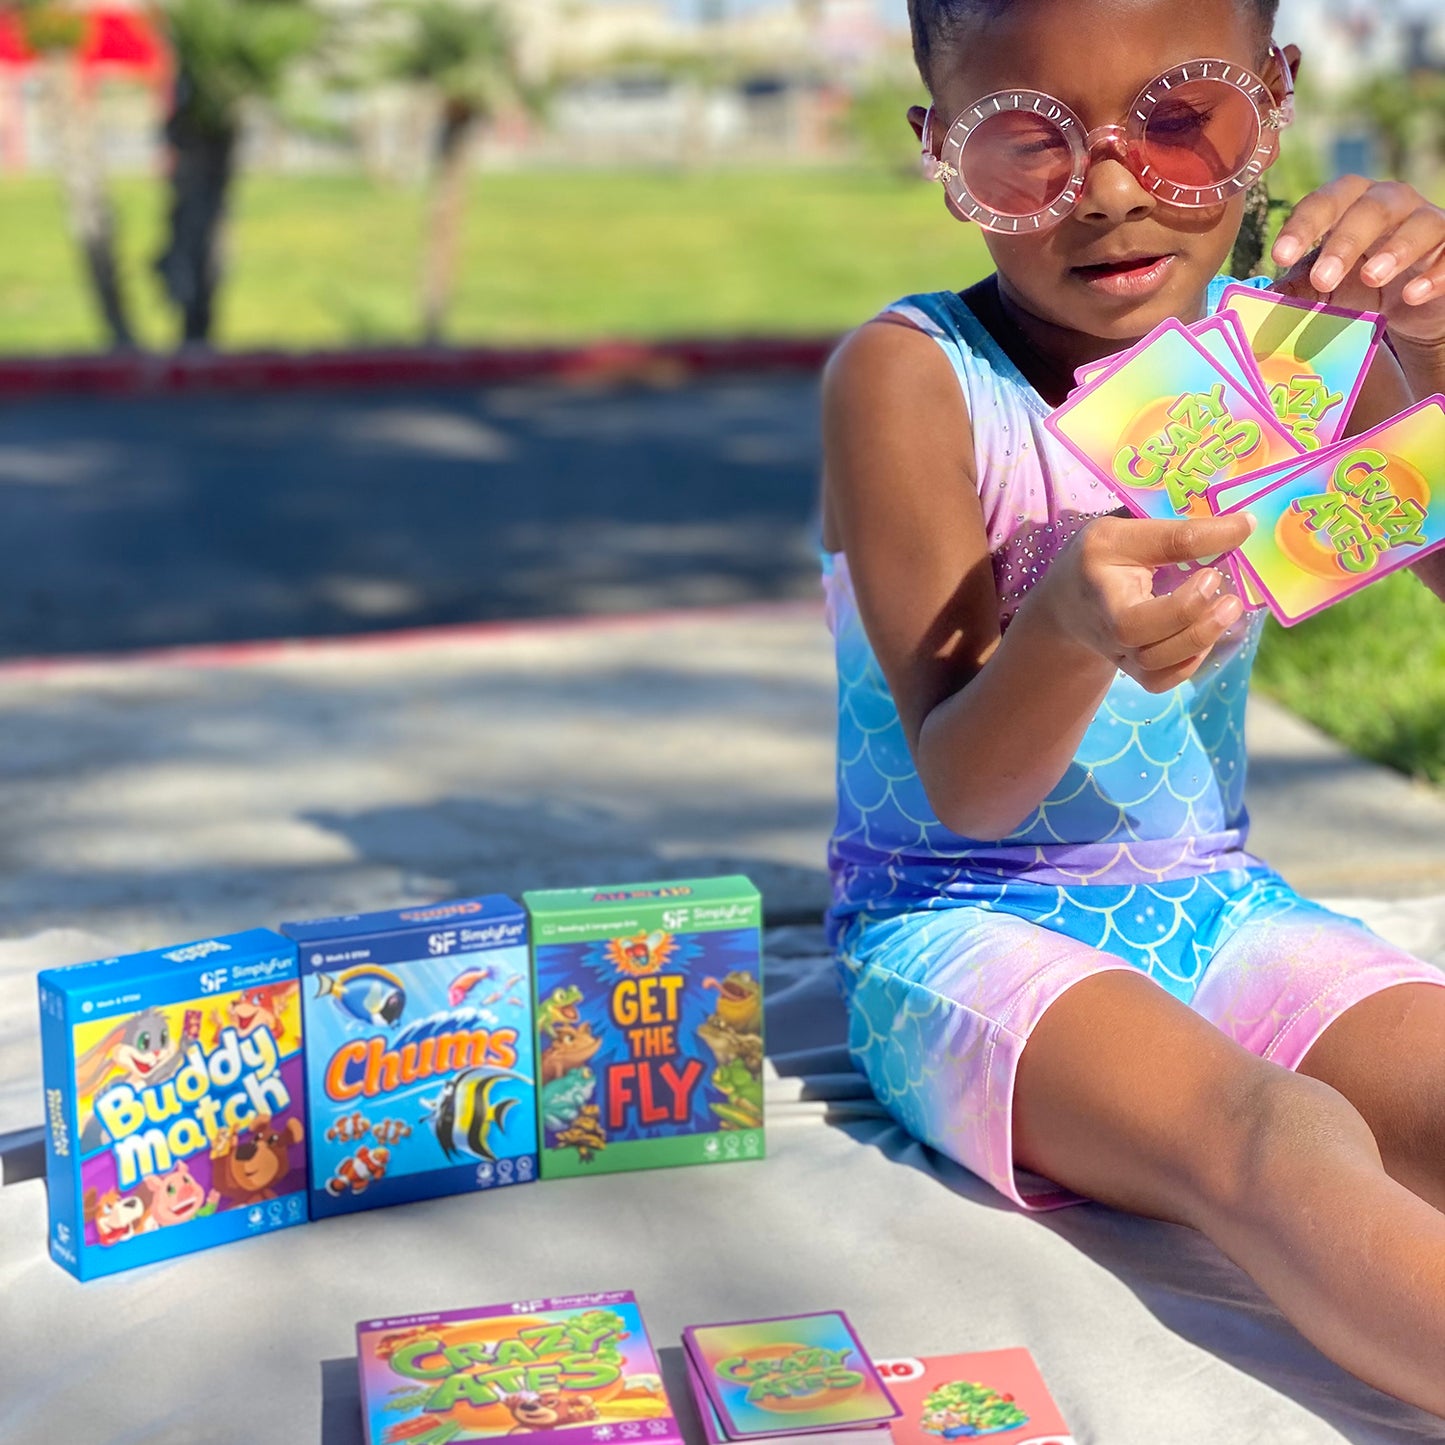 Kids on the Go Card Set by SimplyFun is a fun set of card games focused on colors, shapes, numbers, and letters.